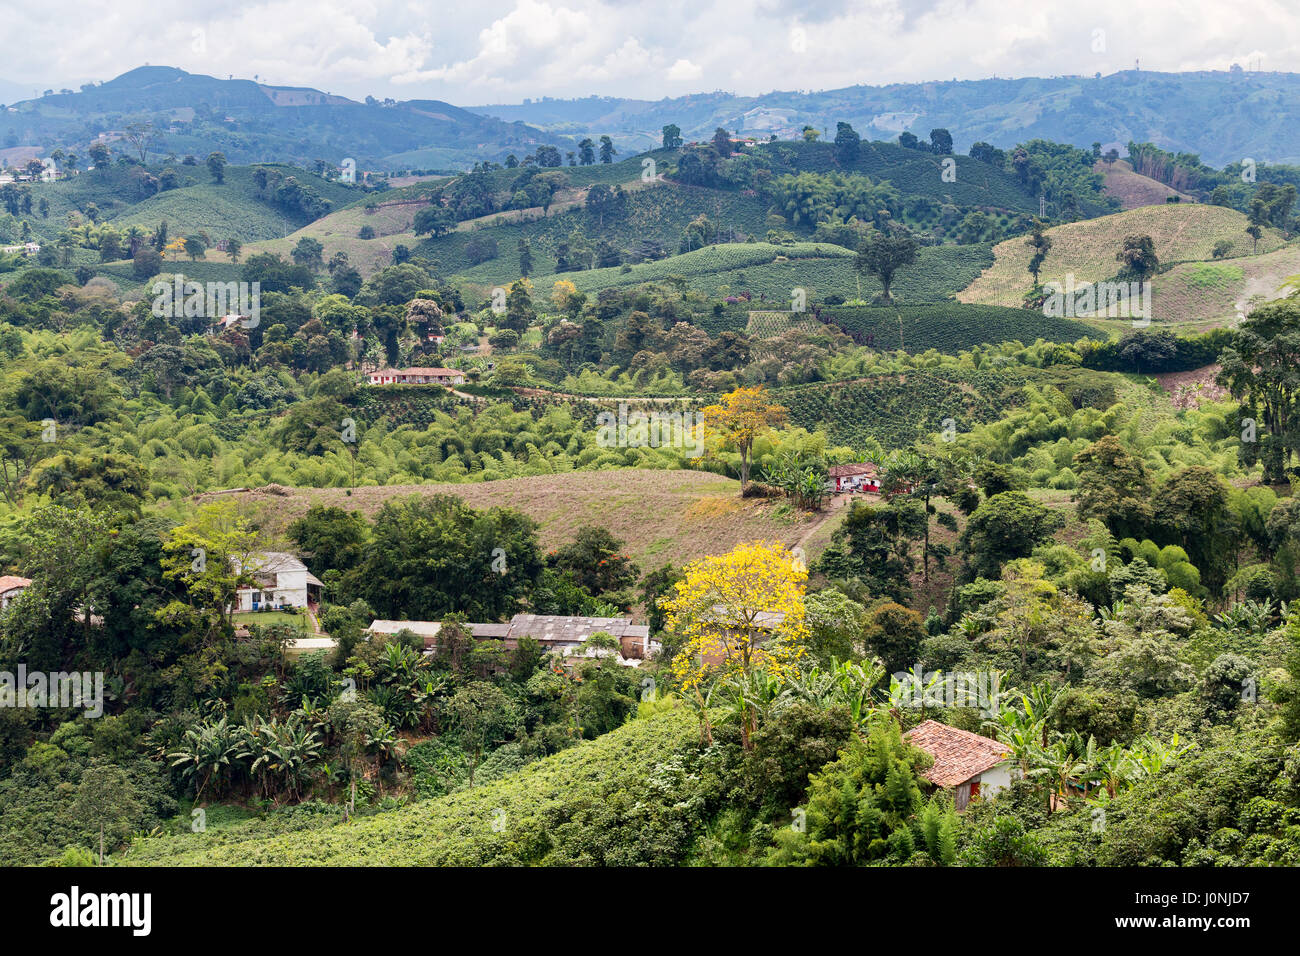 A hillside view of coffee plantations in the state of Caldas in Colombia. Stock Photo